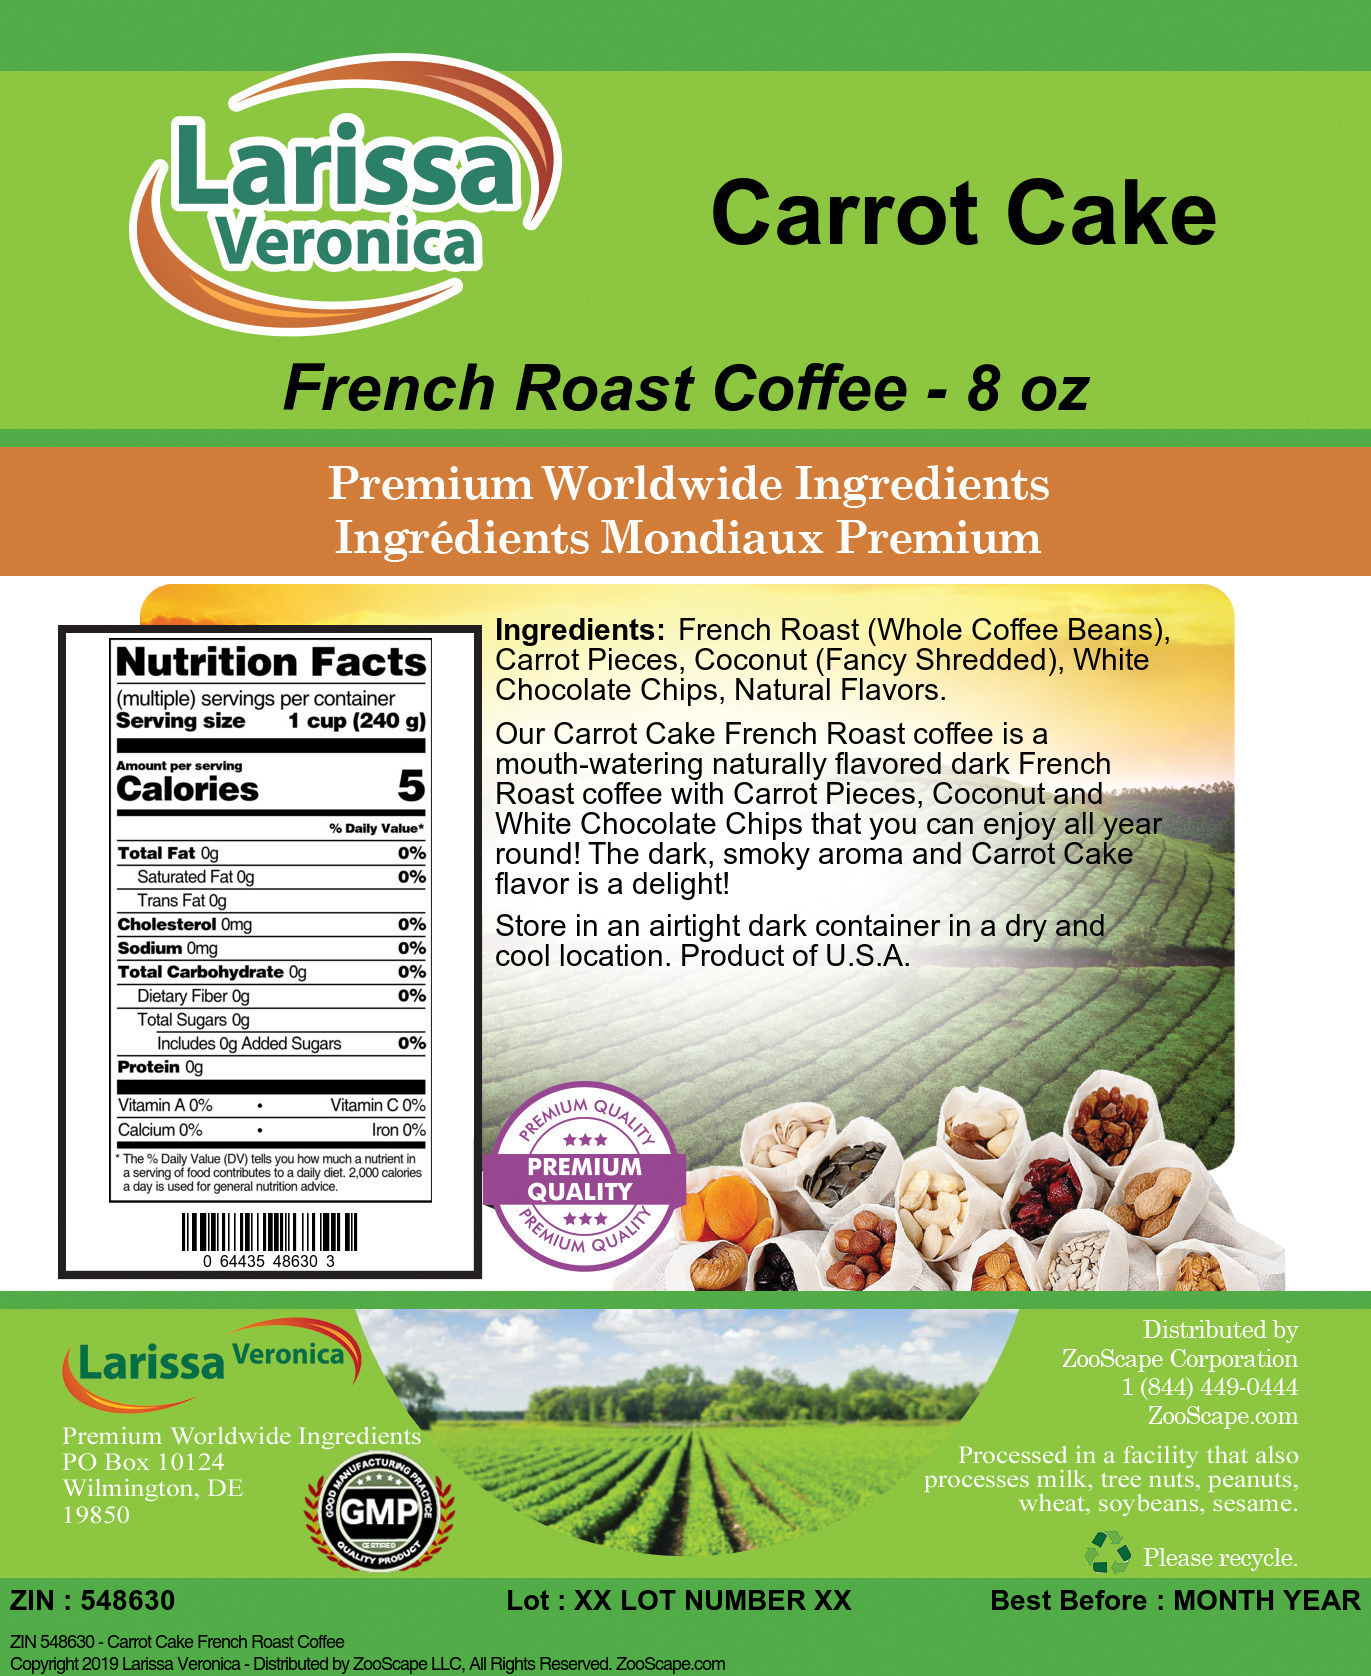 Carrot Cake French Roast Coffee - Label